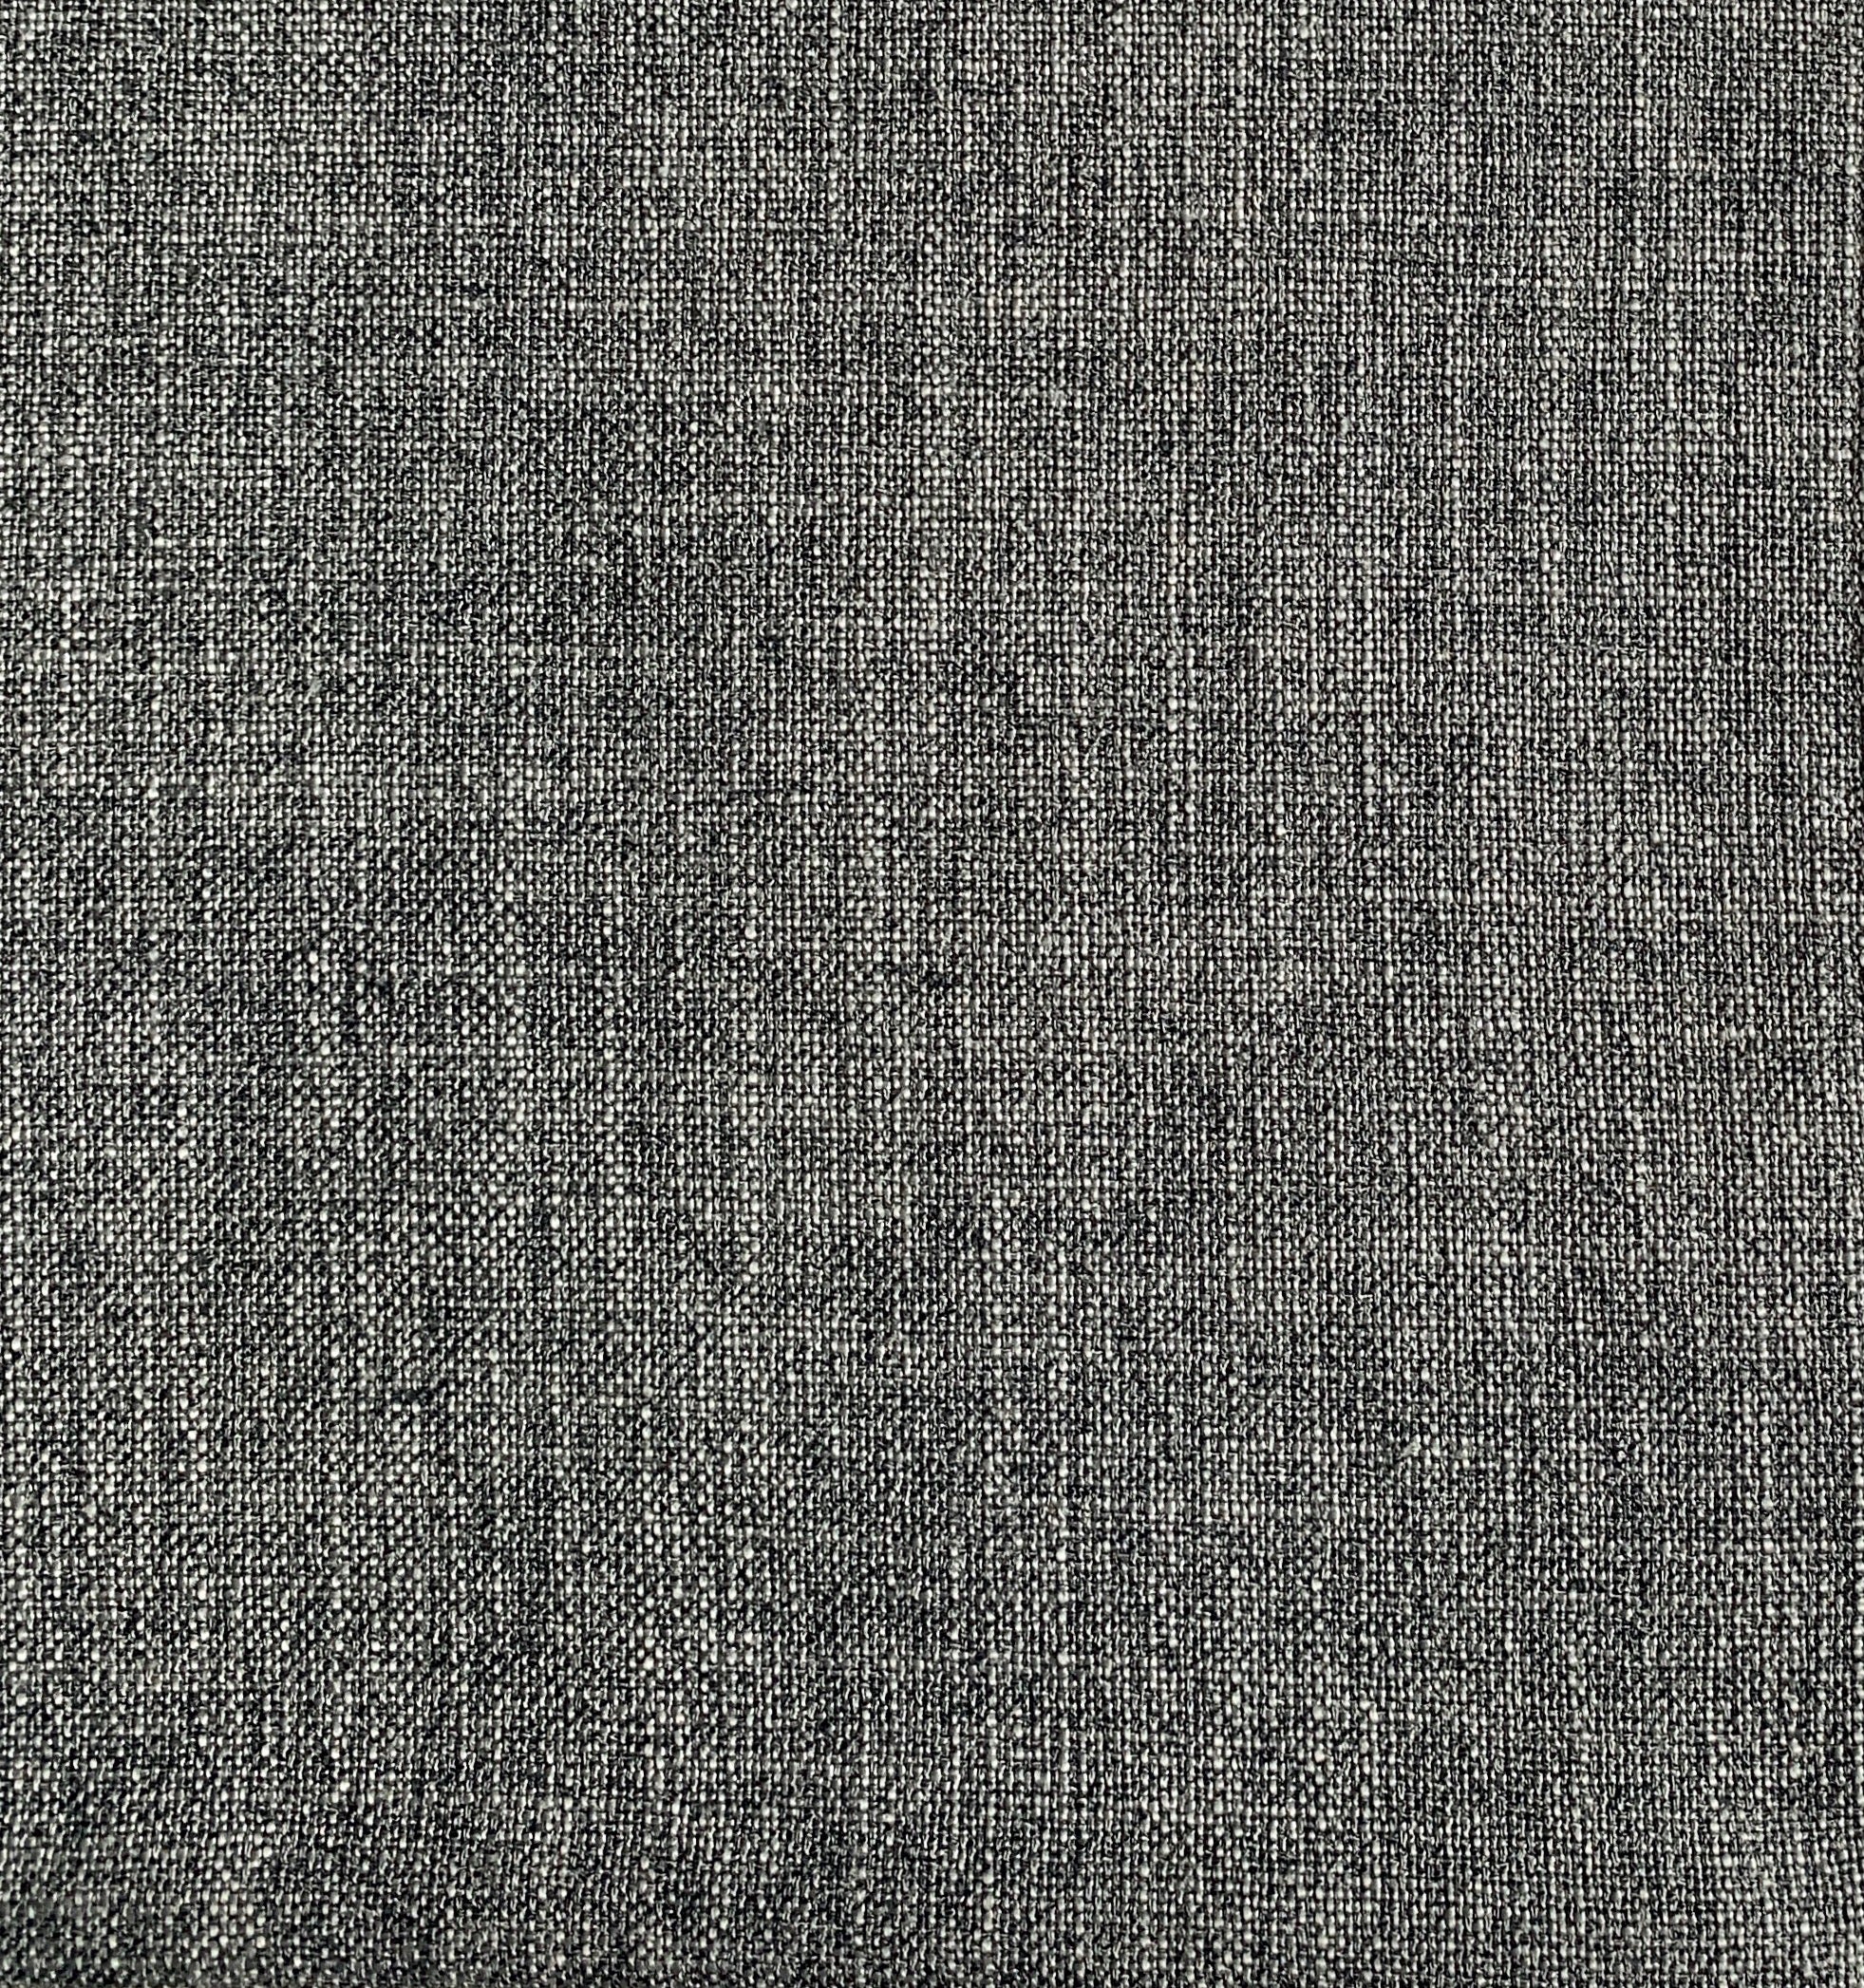 Nomad Heathered Placemat - Graphite